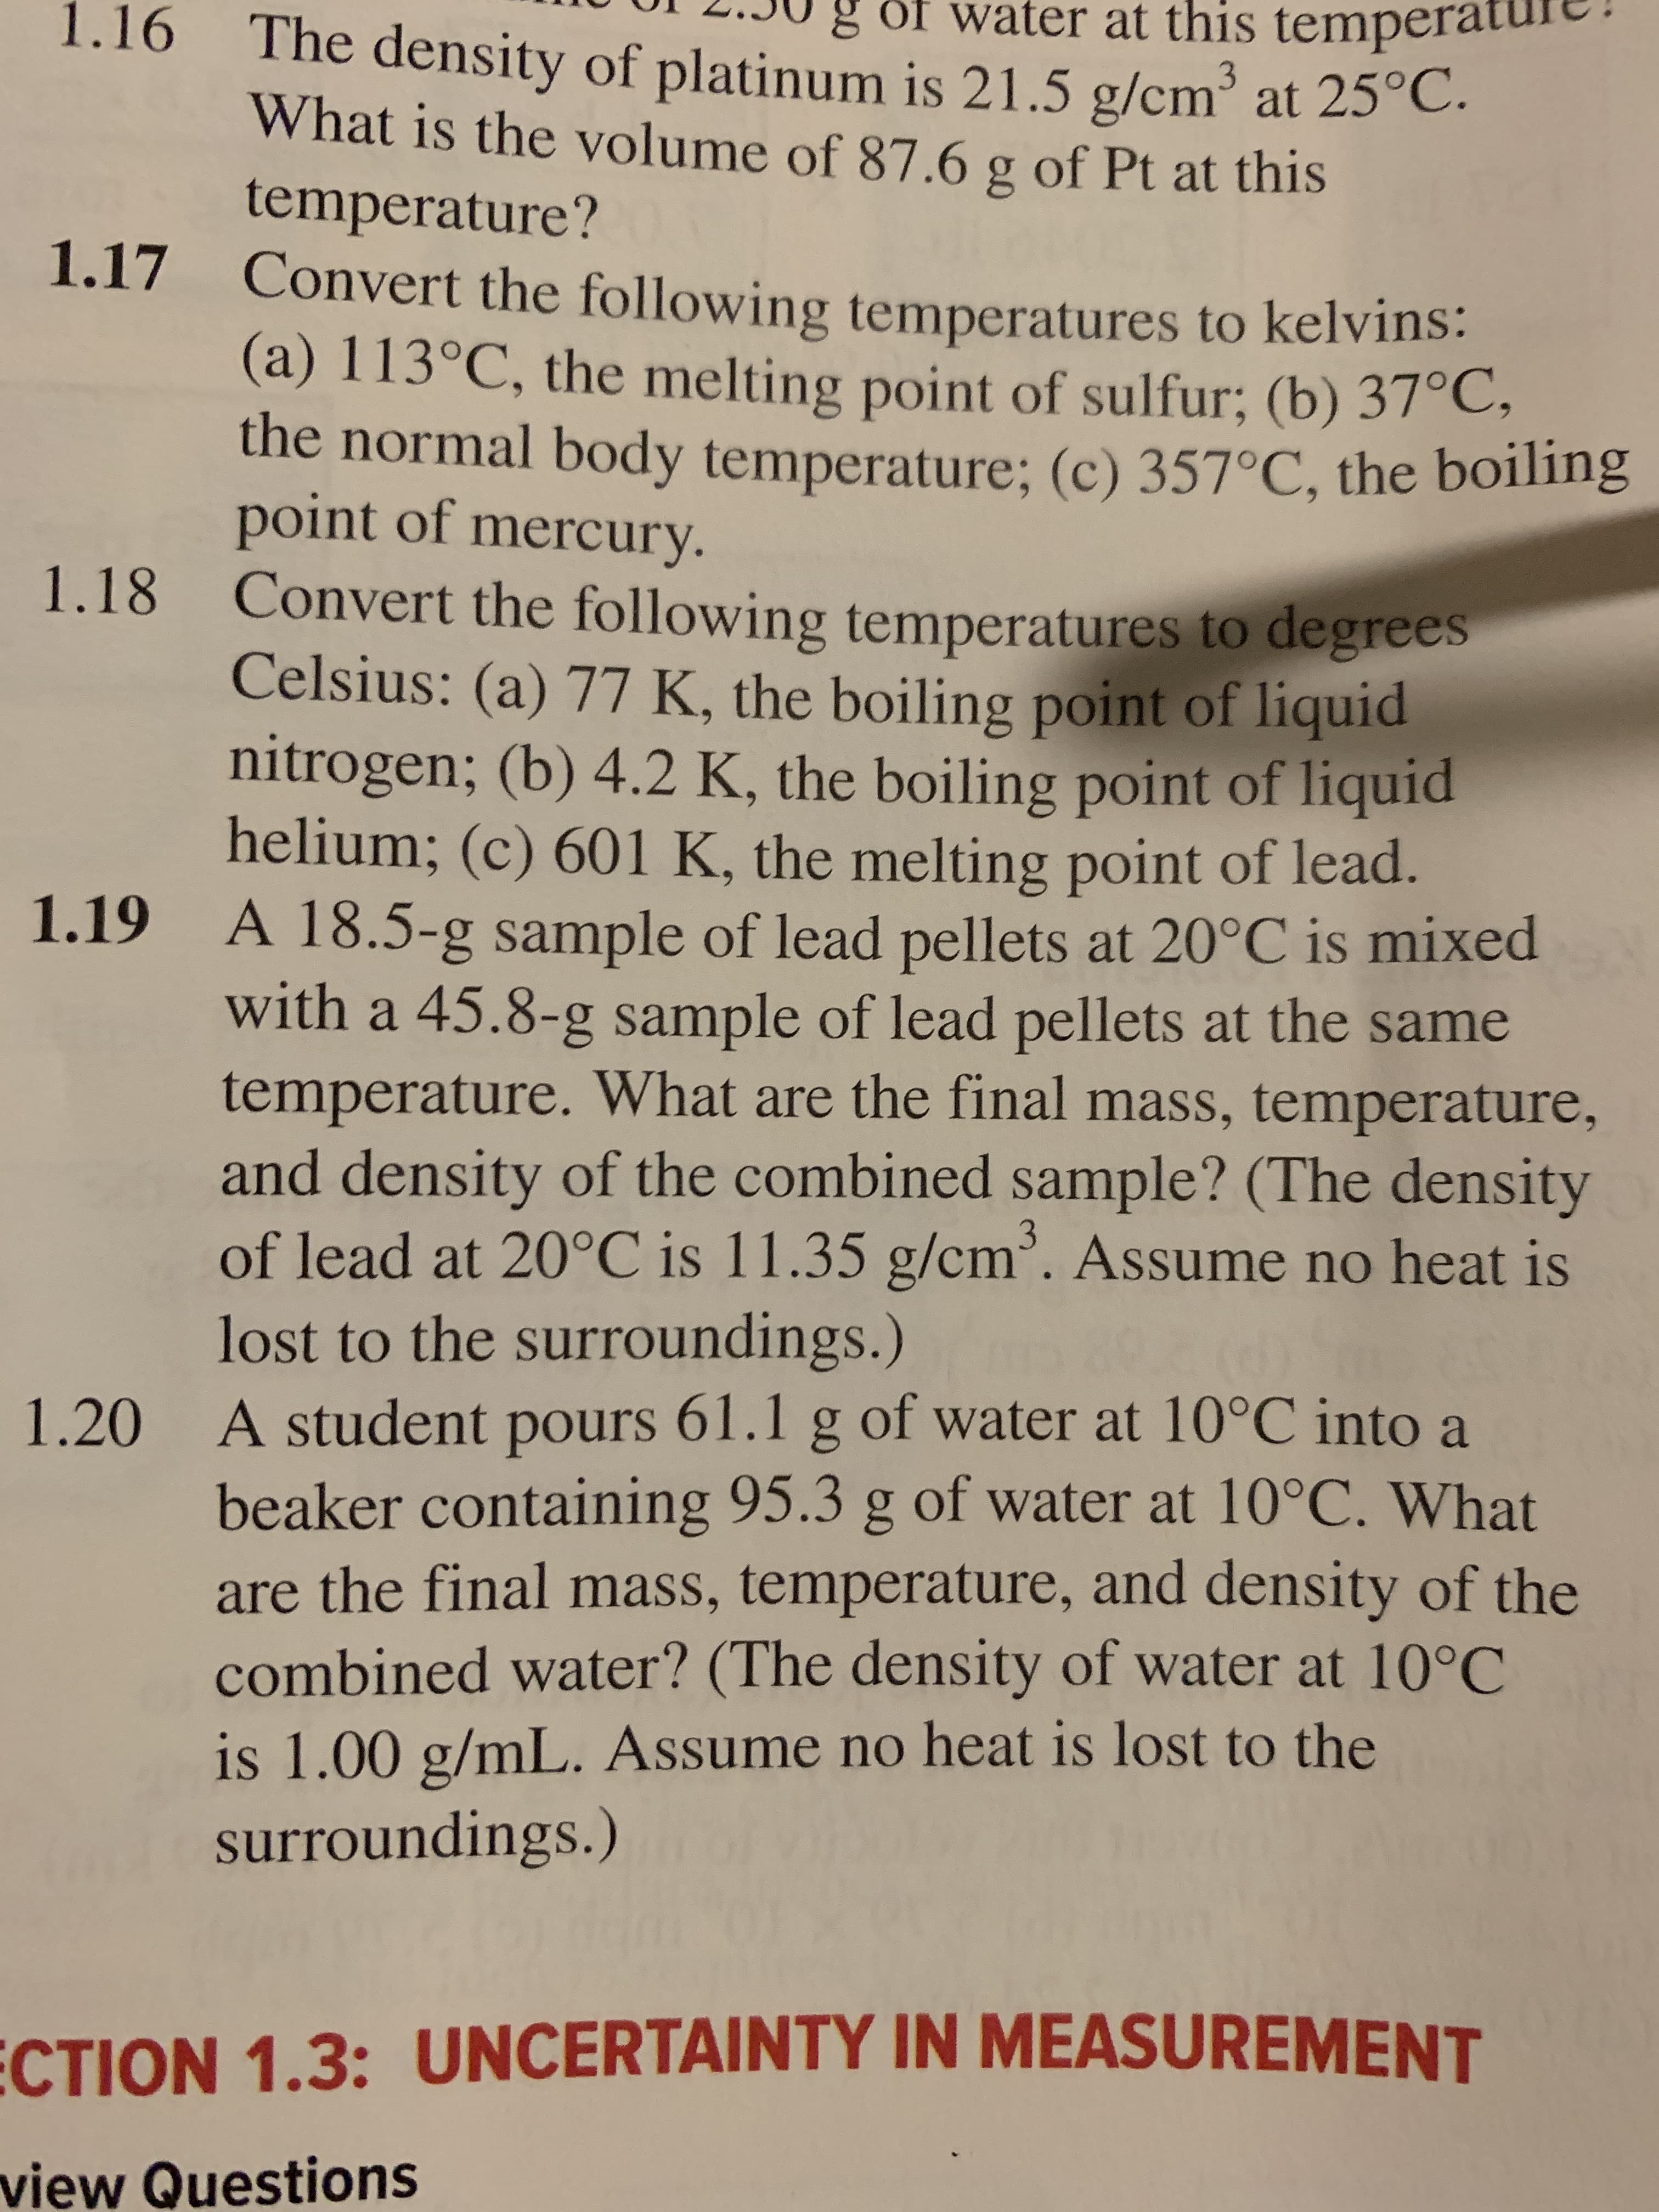 of water at this tempera
1.16
The density of platinum is 21.5 g/cm' at 25°C.
What is the volume of 87.6 g of Pt at this
temperature?
1.17 Convert the following temperatures to kelvins:
(a) 113°C, the melting point of sulfur; (b) 37°C
the normal body temperature; (c) 357°C, the boiling
point of mercury.
1.18 Convert the following temperatures to degrees
Celsius: (a) 77 K, the boiling point of liquid
nitrogen; (b) 4.2 K, the boiling point of liquid
helium; (c) 601 K, the melting point of lead.
1.19 A 18.5-g sample of lead pellets at 20°C is mixed
with a 45.8-g sample of lead pellets at the same
temperature. What are the final mass, temperature,
and density of the combined sample? (The density
of lead at 20°C is 11.35 g/cm. Assume no heat is
lost to the surroundings.)
A student pours 61.1 g of water at 10°C into a
beaker containing 95.3 g of water at 10°C. What
are the final mass, temperature, and density of the
combined water? (The density of water at 10°C
is 1.00 g/mL. Assume no heat is lost to the
surroundings.)
1.20
ECTION 1.3: UNCERTAINTY IN MEASUREMENT
view Questions
